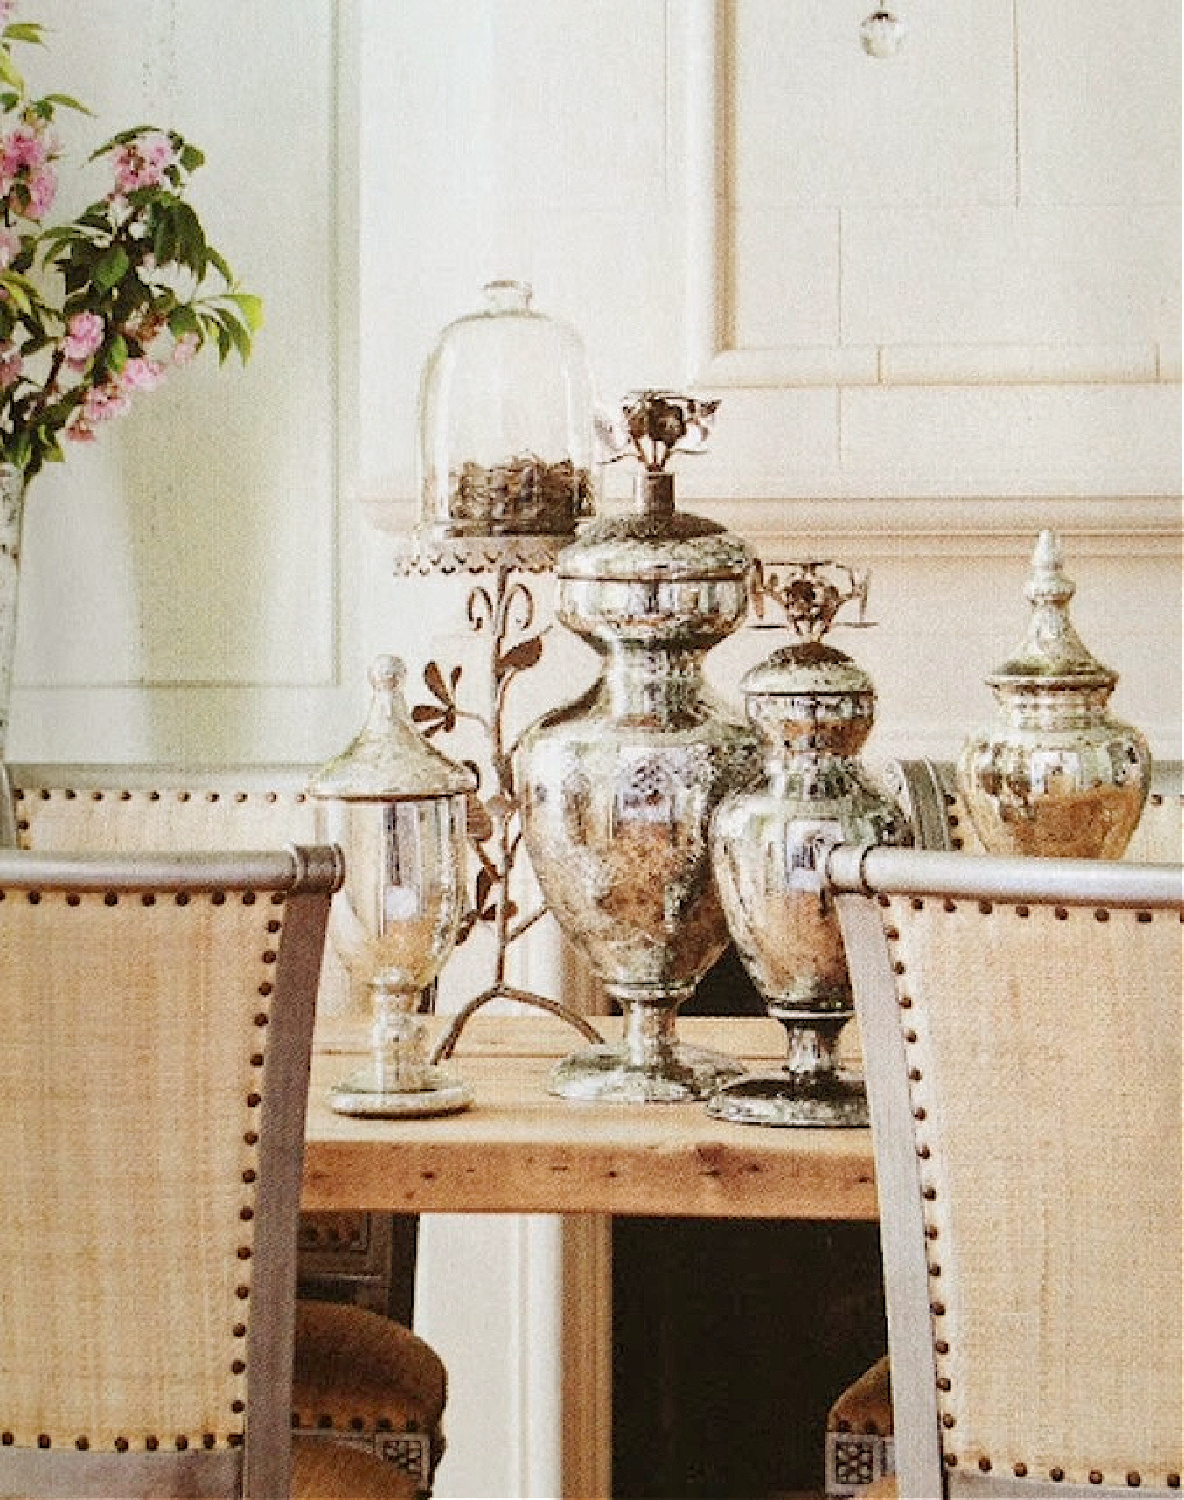 French country dining room with mercury glass on table - Desiree Ashworth (styling by Bonnie Broten for COUNTRY FRENCH magazine). #frenchcountrydiningroom